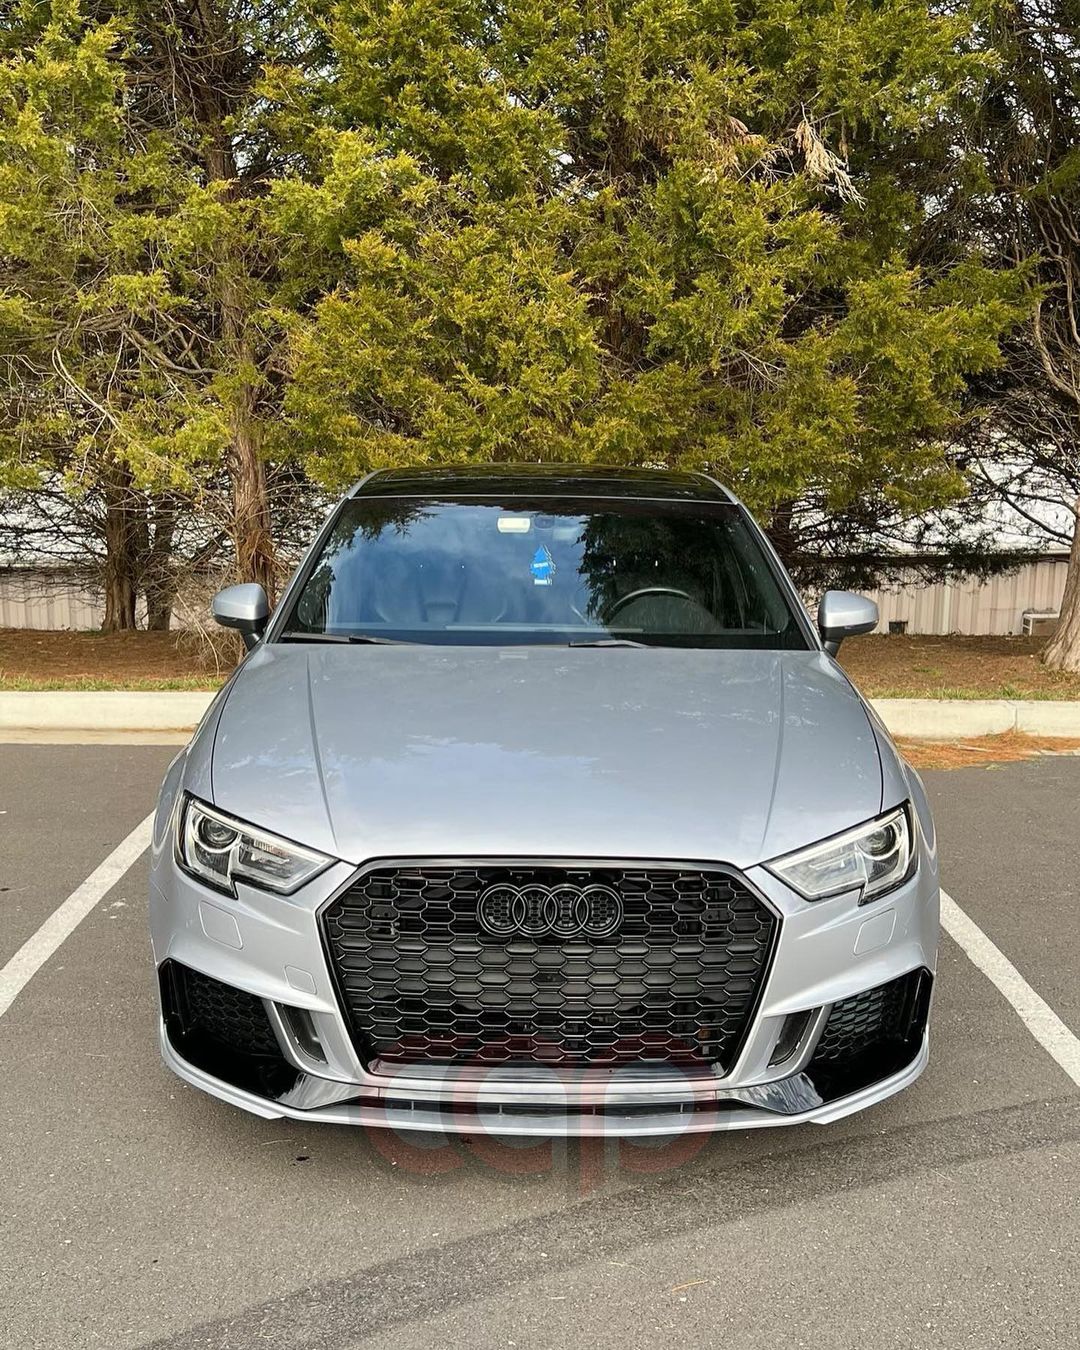 2017 audi a3 honeycomb grille